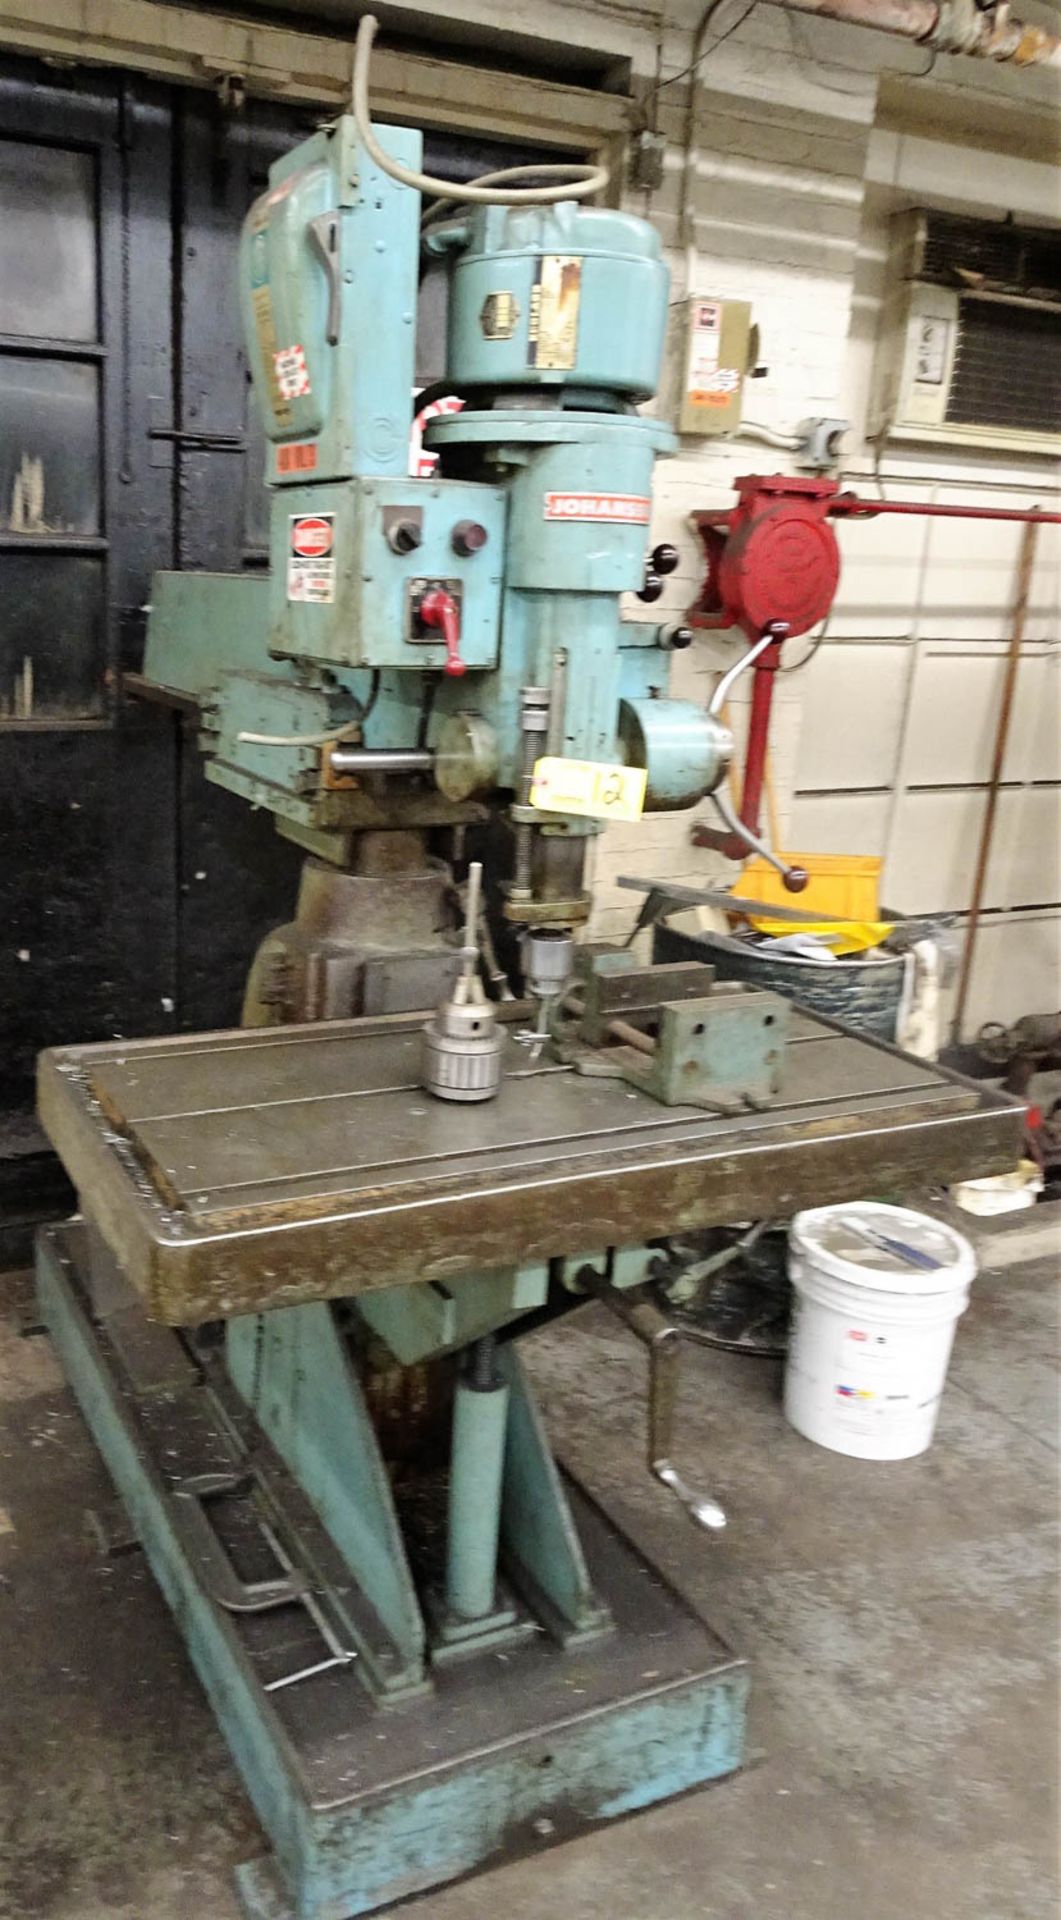 JONHNSSON GEAR DRIVE RADIAL DRILL PRESS, WITH VARIABLE SPEED, BOX WAYS ON RAM, APPROXIMATELY 17'' - Image 2 of 3